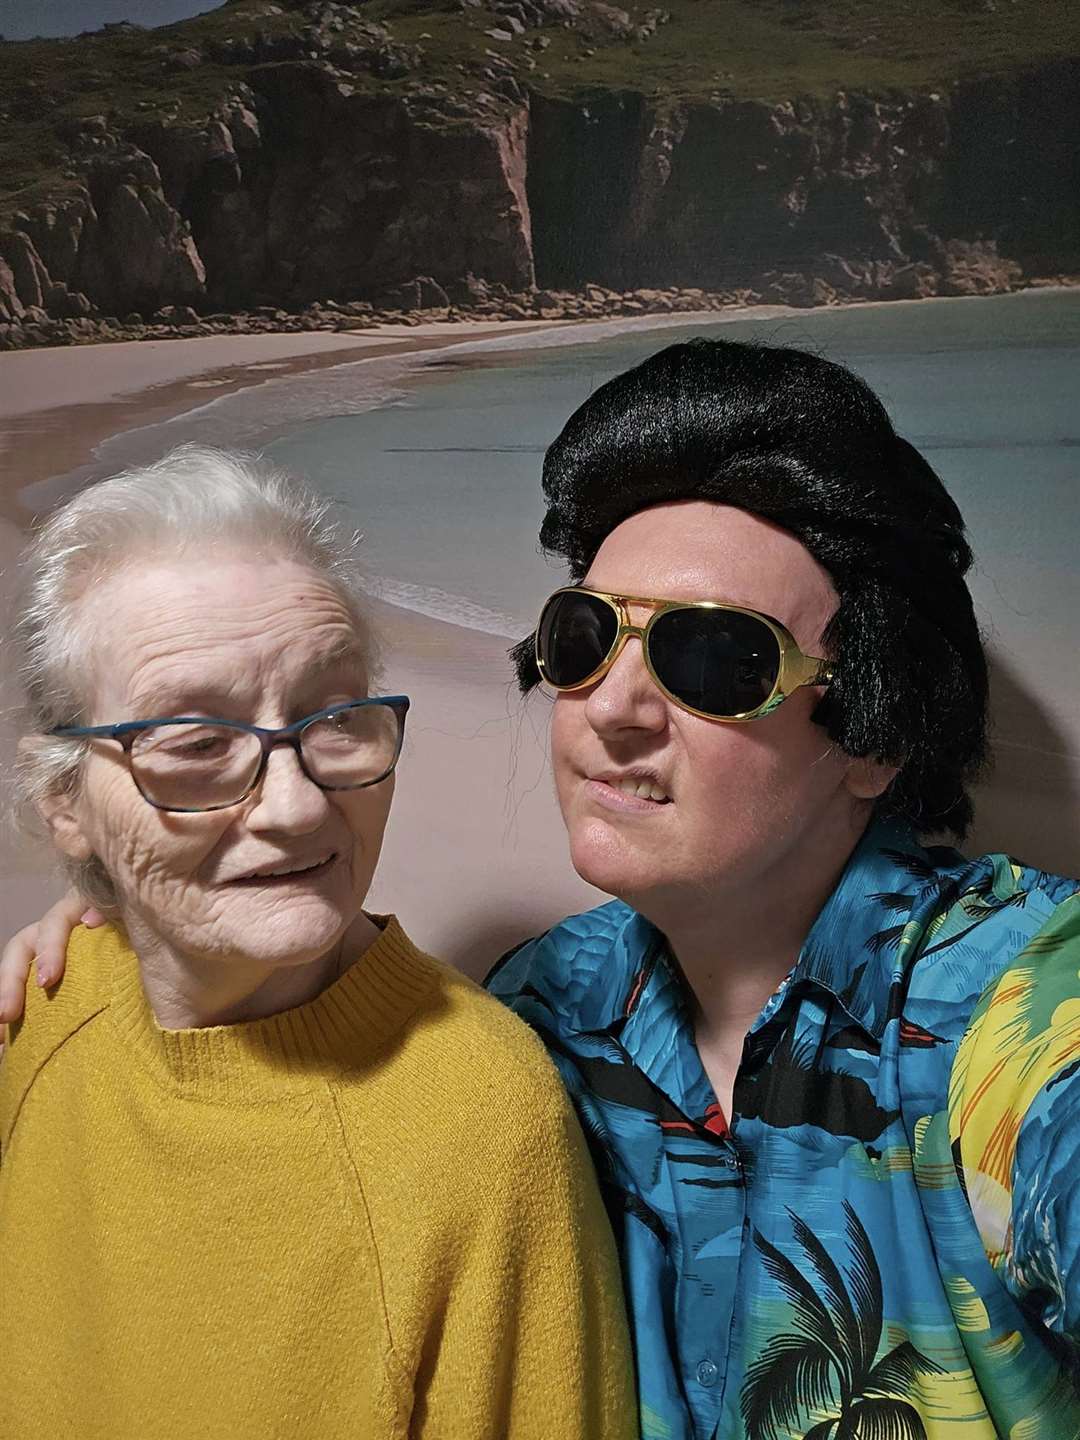 Elvis poses for a snapshot with care home resident Catherine Foubister.